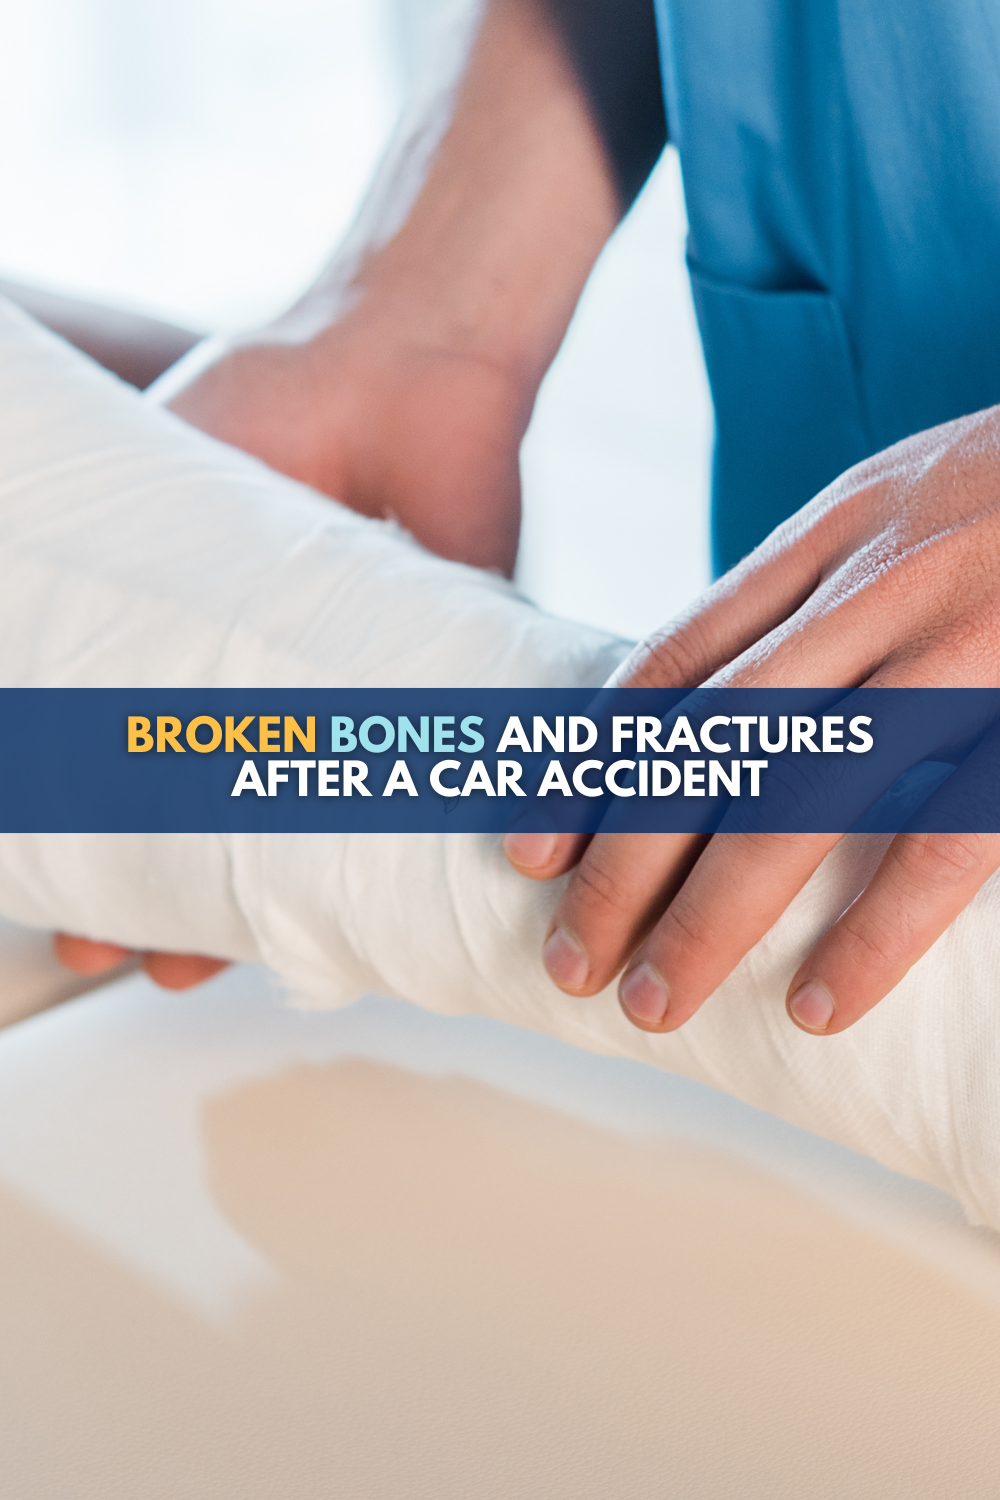 Broken Bones and Fractures After Car Accident: What You Need To Know